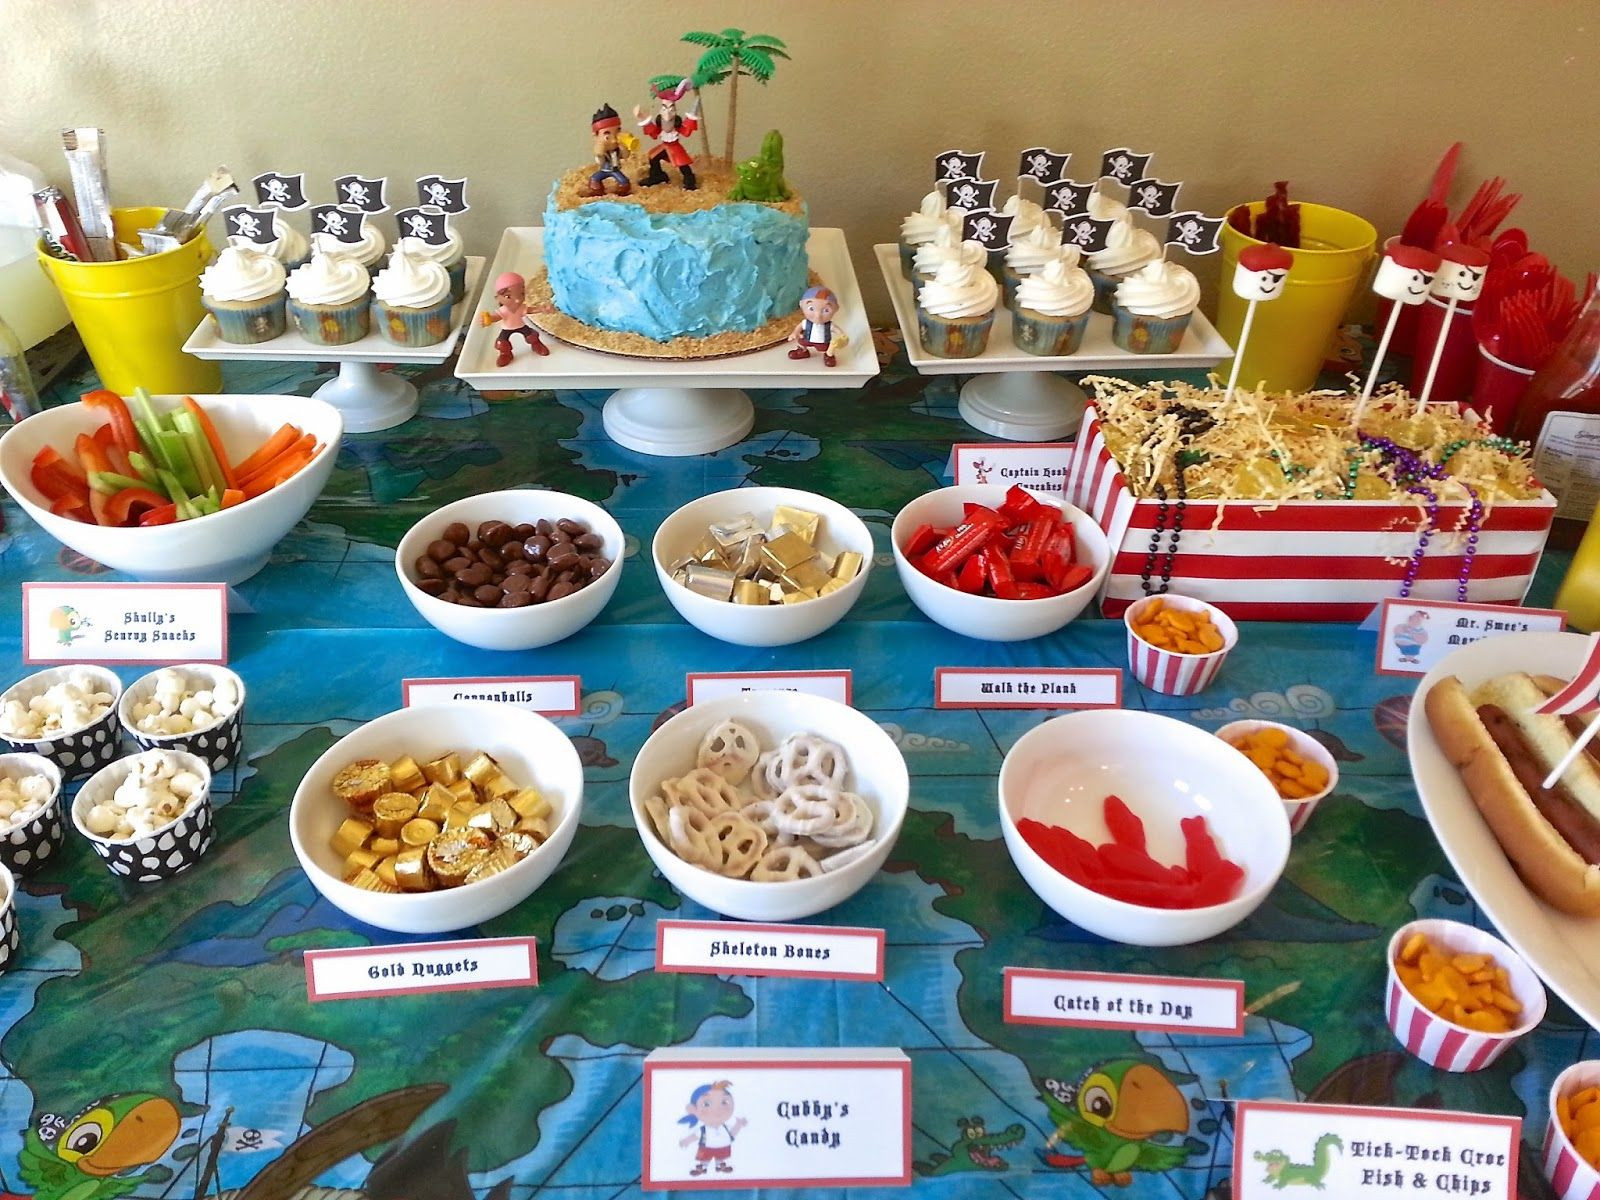 Jake And The Neverland Pirates Party Food Ideas
 Much Kneaded Jake and the Neverland Pirates Birthday